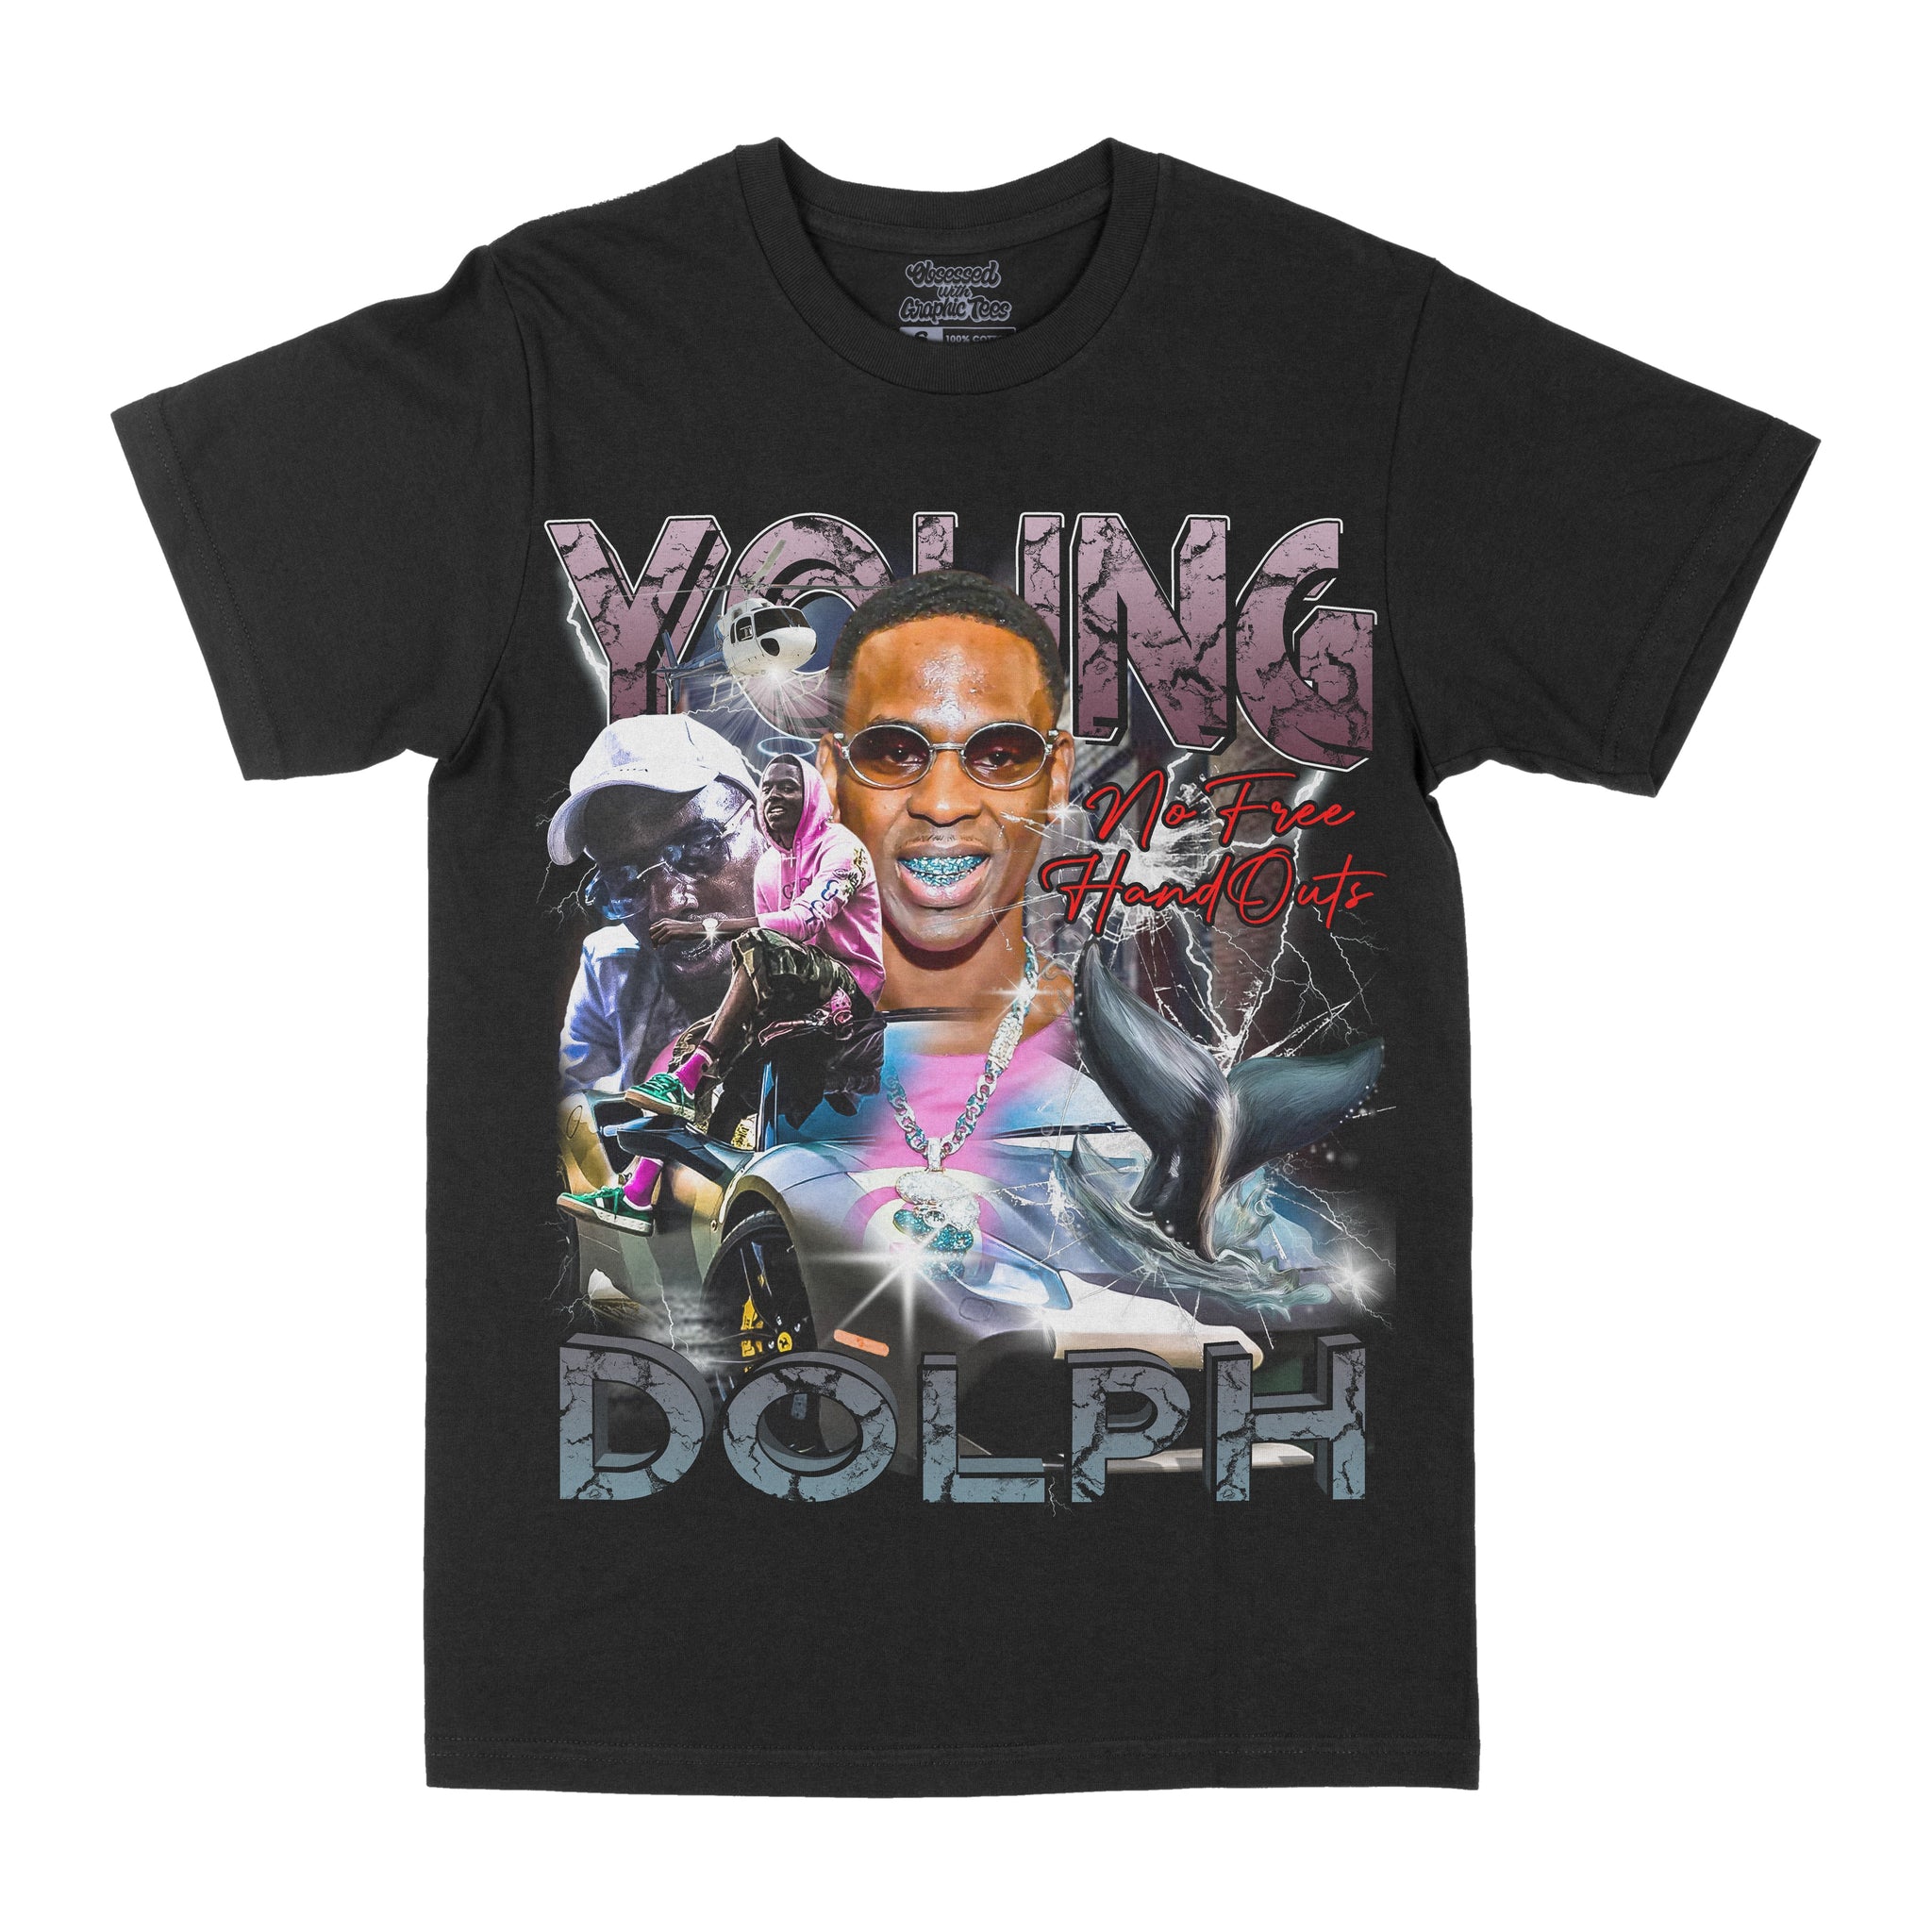 Young Dolph "Hand Outs" Graphic Tee